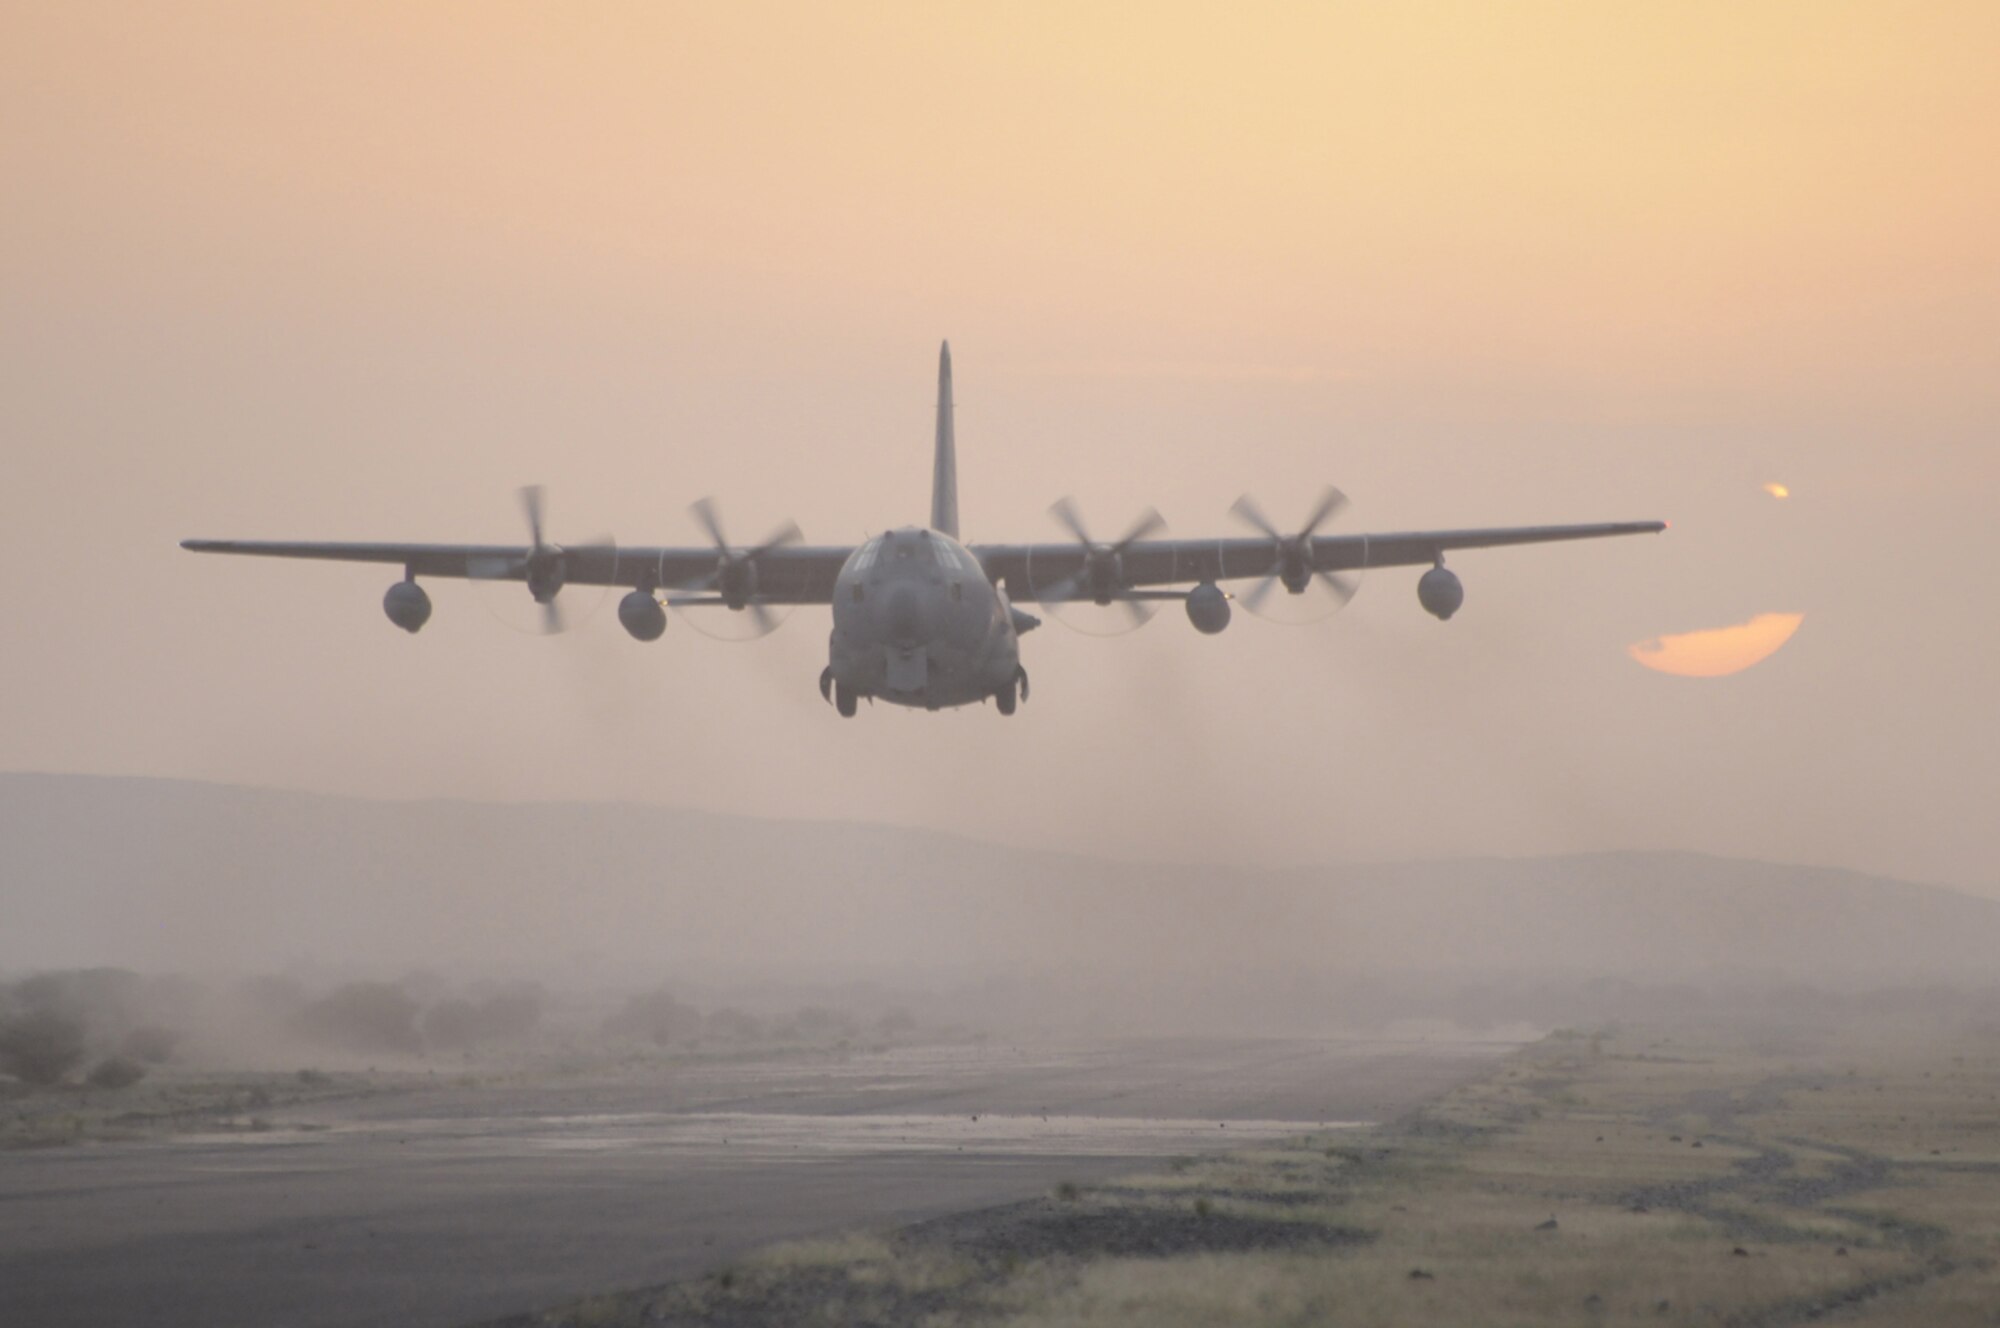 An Air Force Reserve Command HC-130 aircraft lands on an unimproved airstrip in Africa. The 920th Rescue Wing from Patrick Air Force Base, Fla., sent about 100 reservists to Djibouti, Africa, to provide combat search-and-rescue support for two months. The last group of 28 reservists returned to Patrick AFB on May 14, 2009. (U.S. Air Force photo/Master Sgt. Rob Grande)